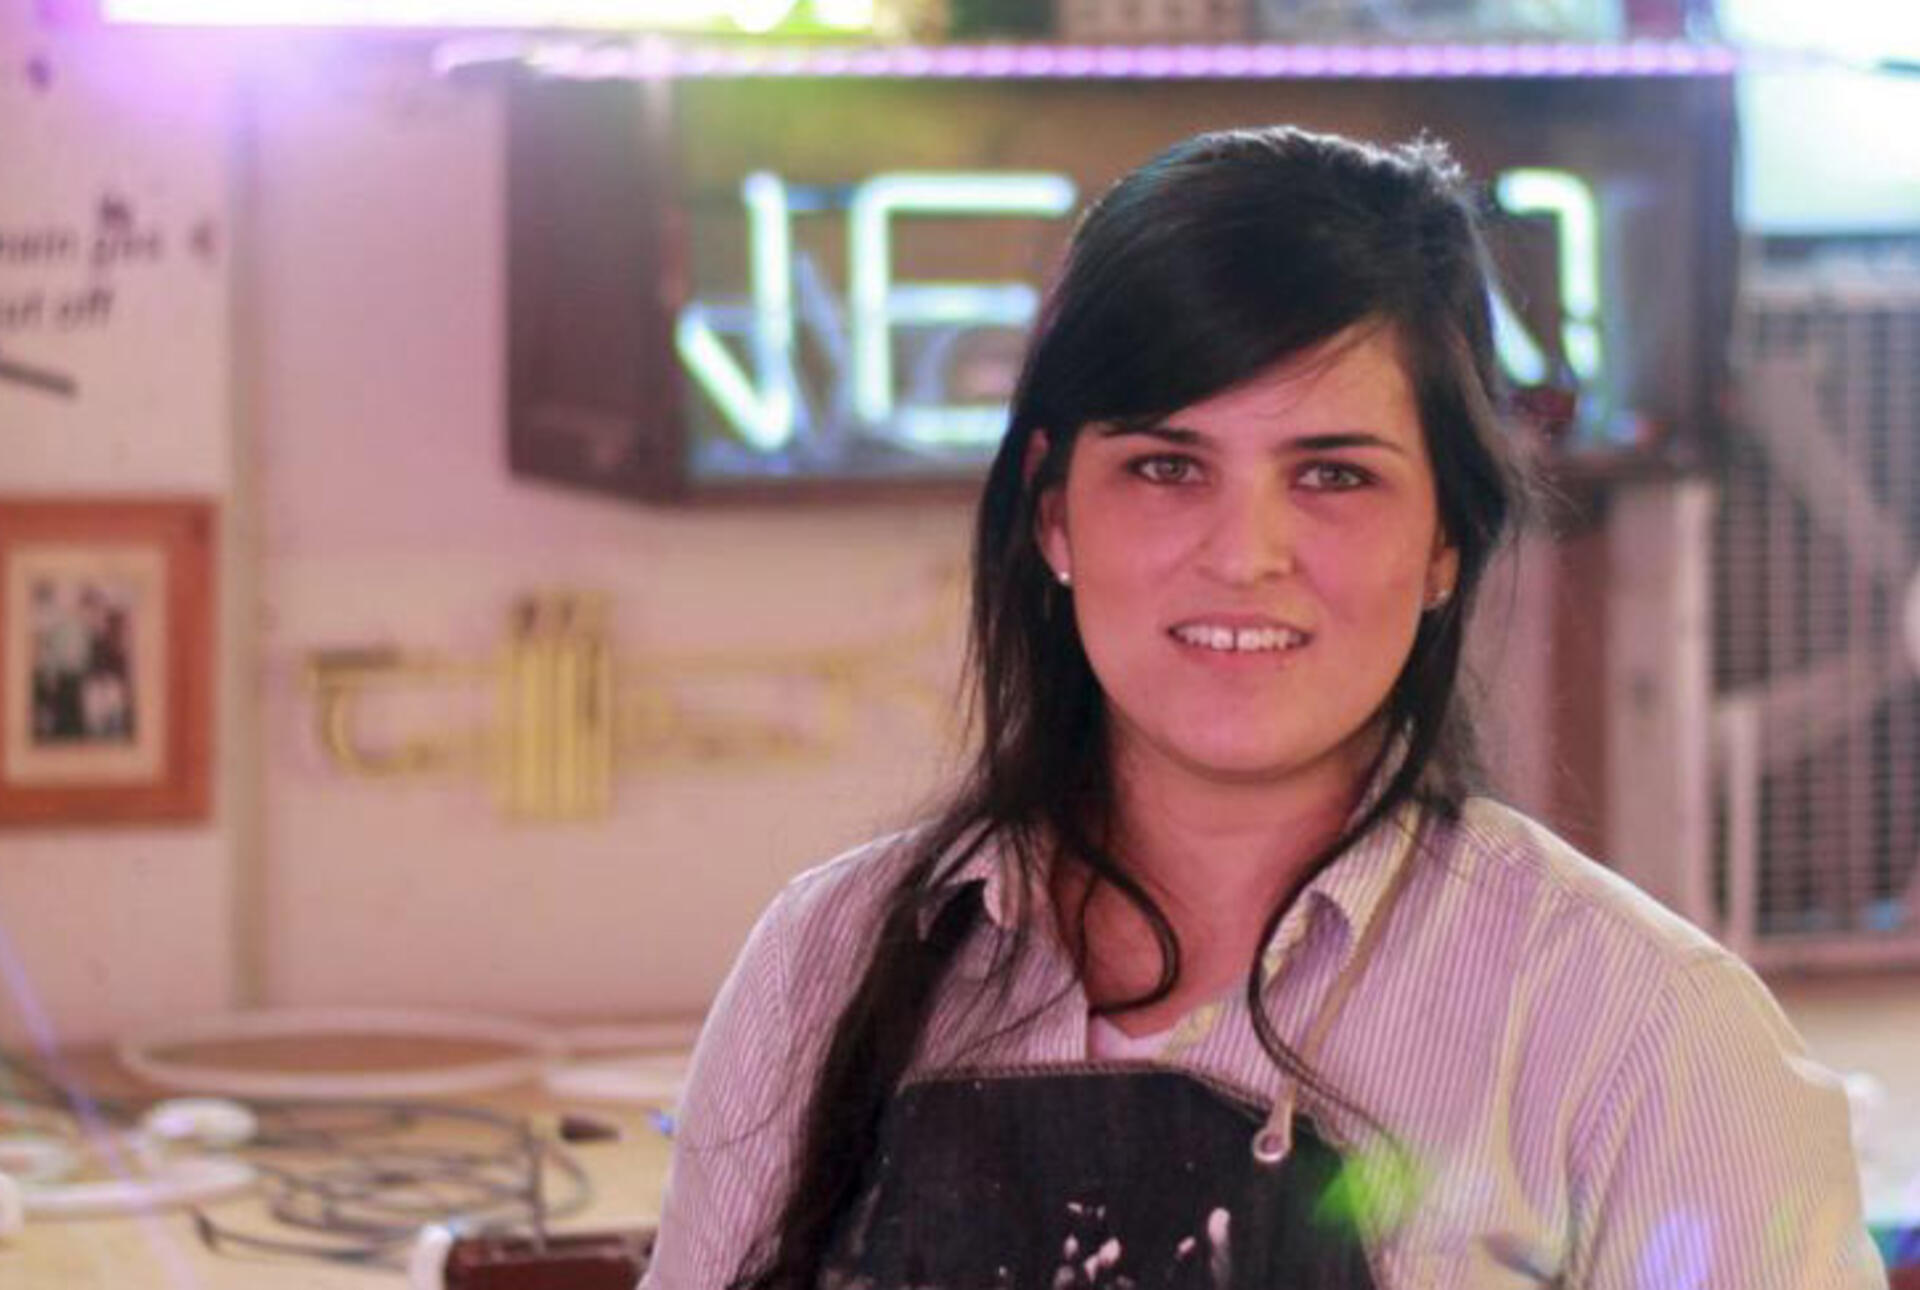 a young woman with dark hair stands in a studio in front of a neon sign